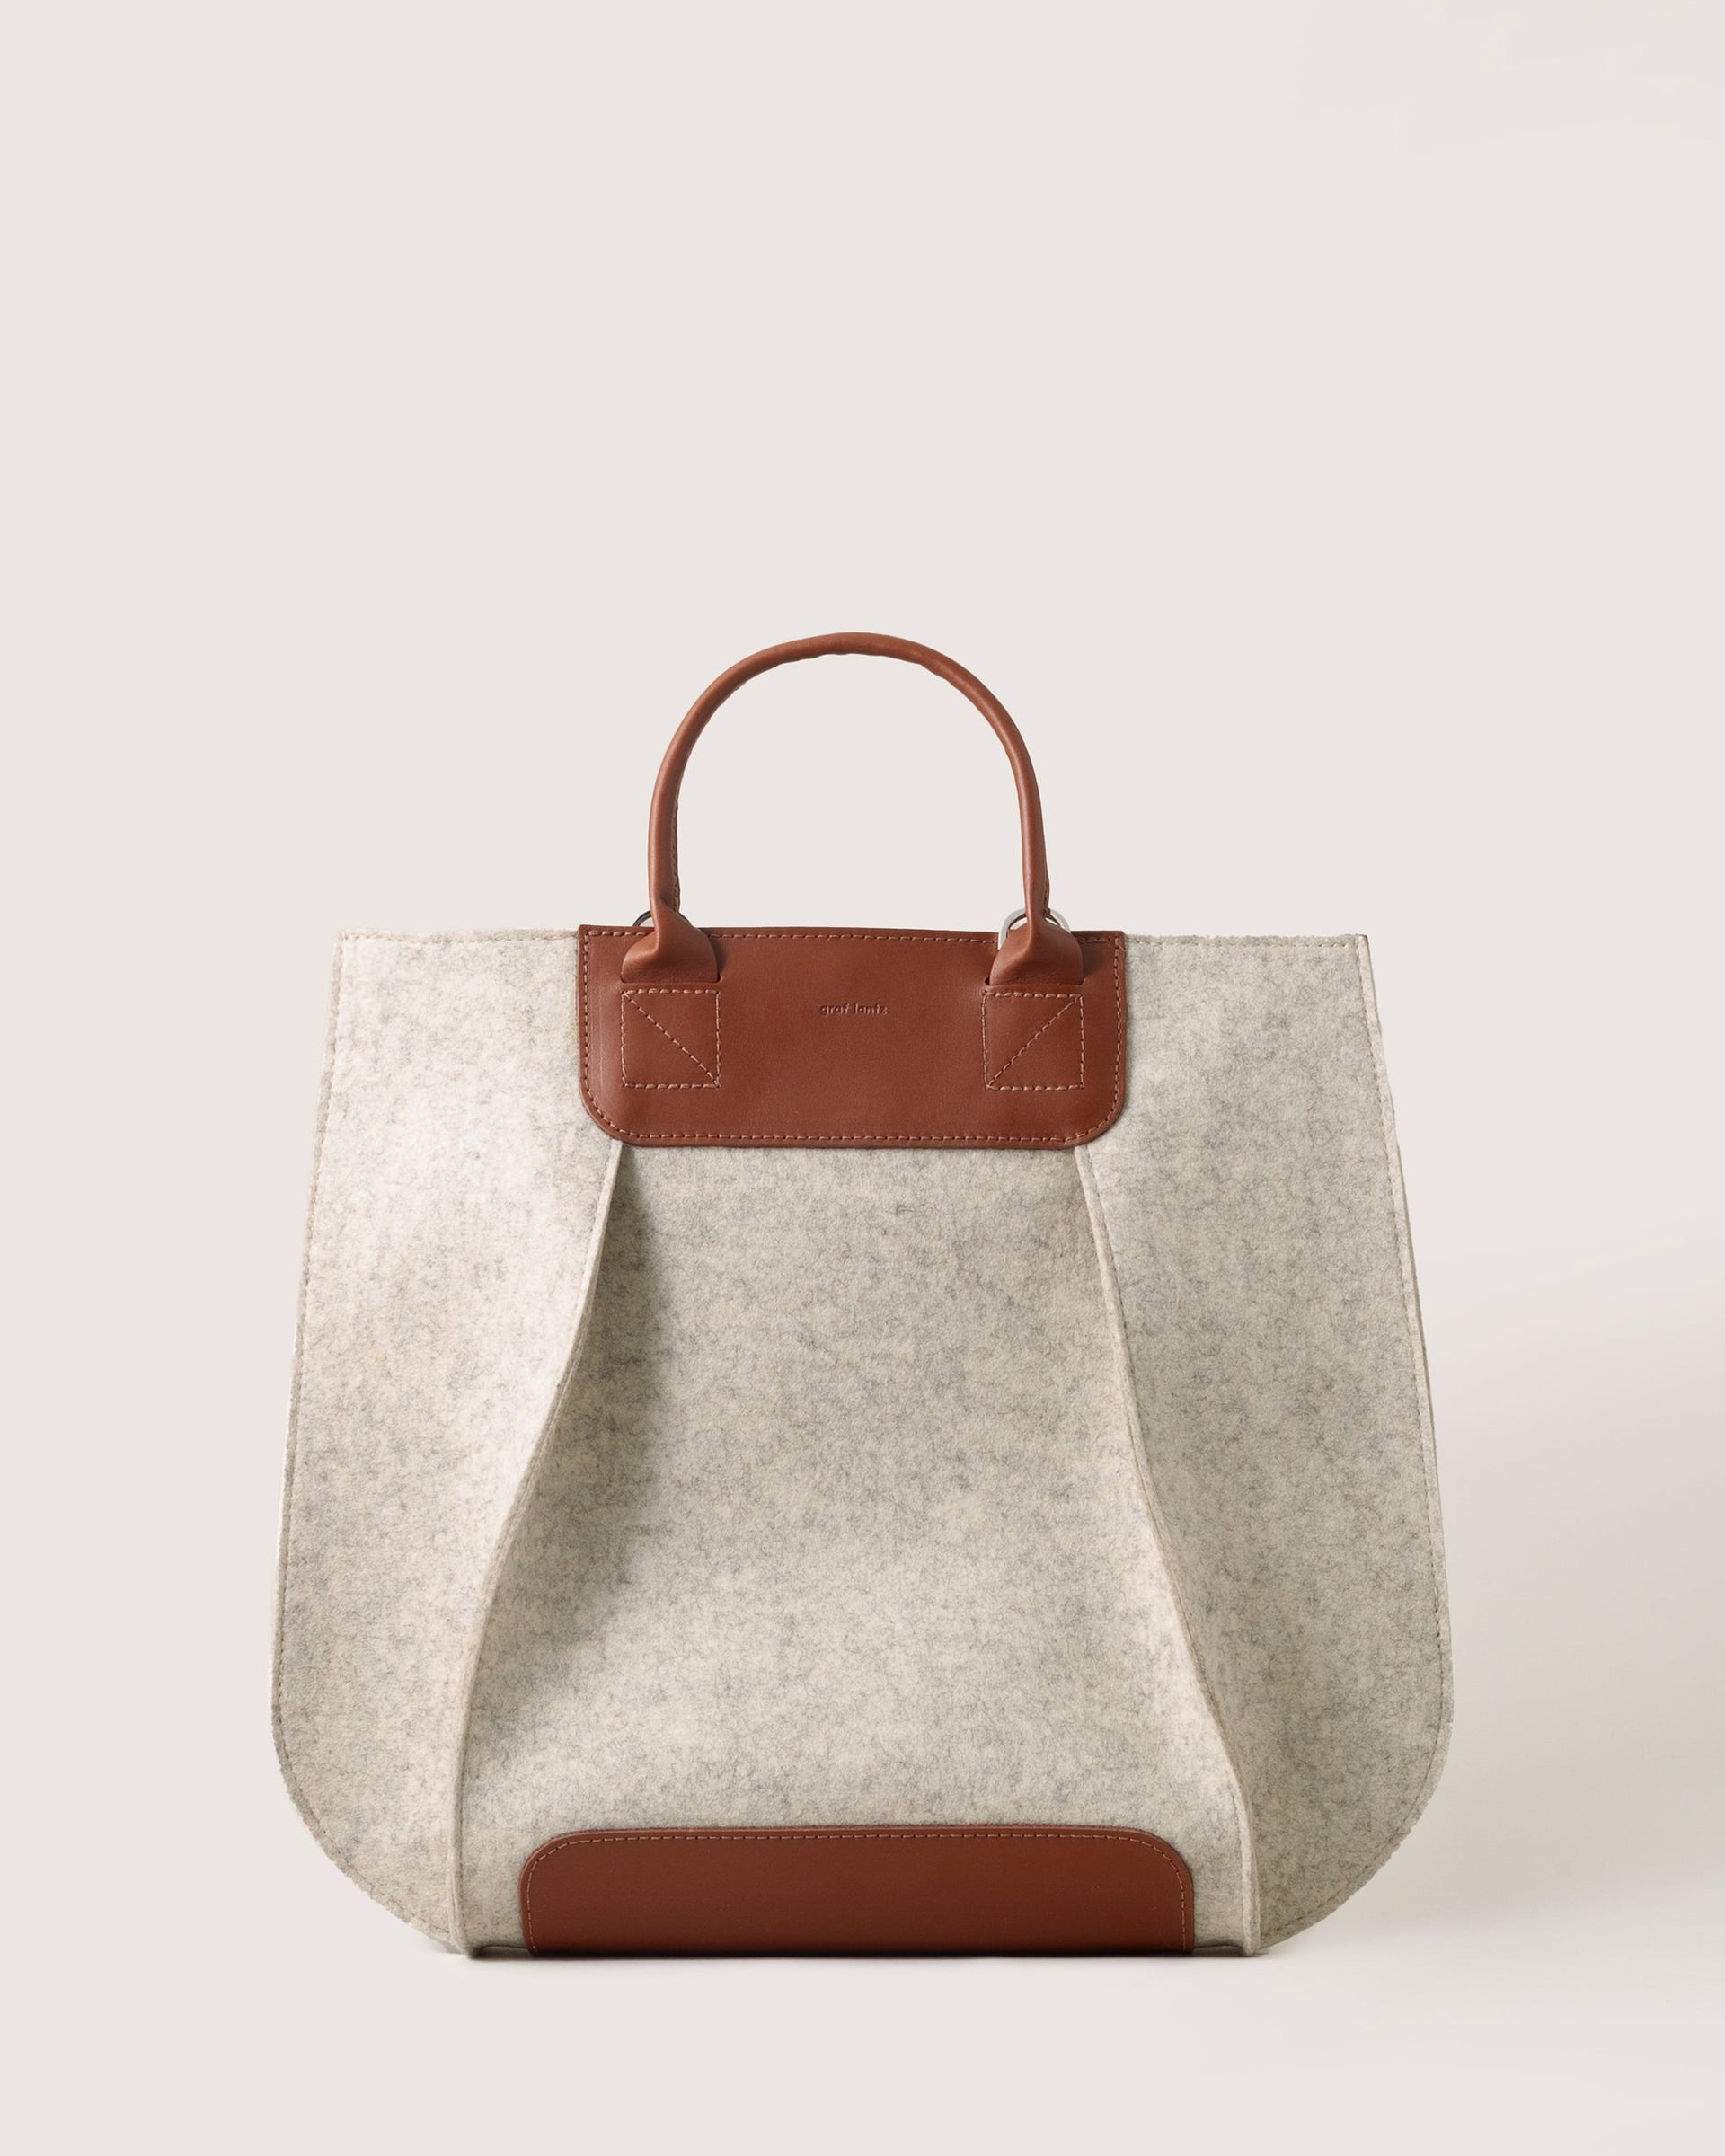 Frankie Merino Wool Tote in heather white and sienna by Graf Lantz, front view.